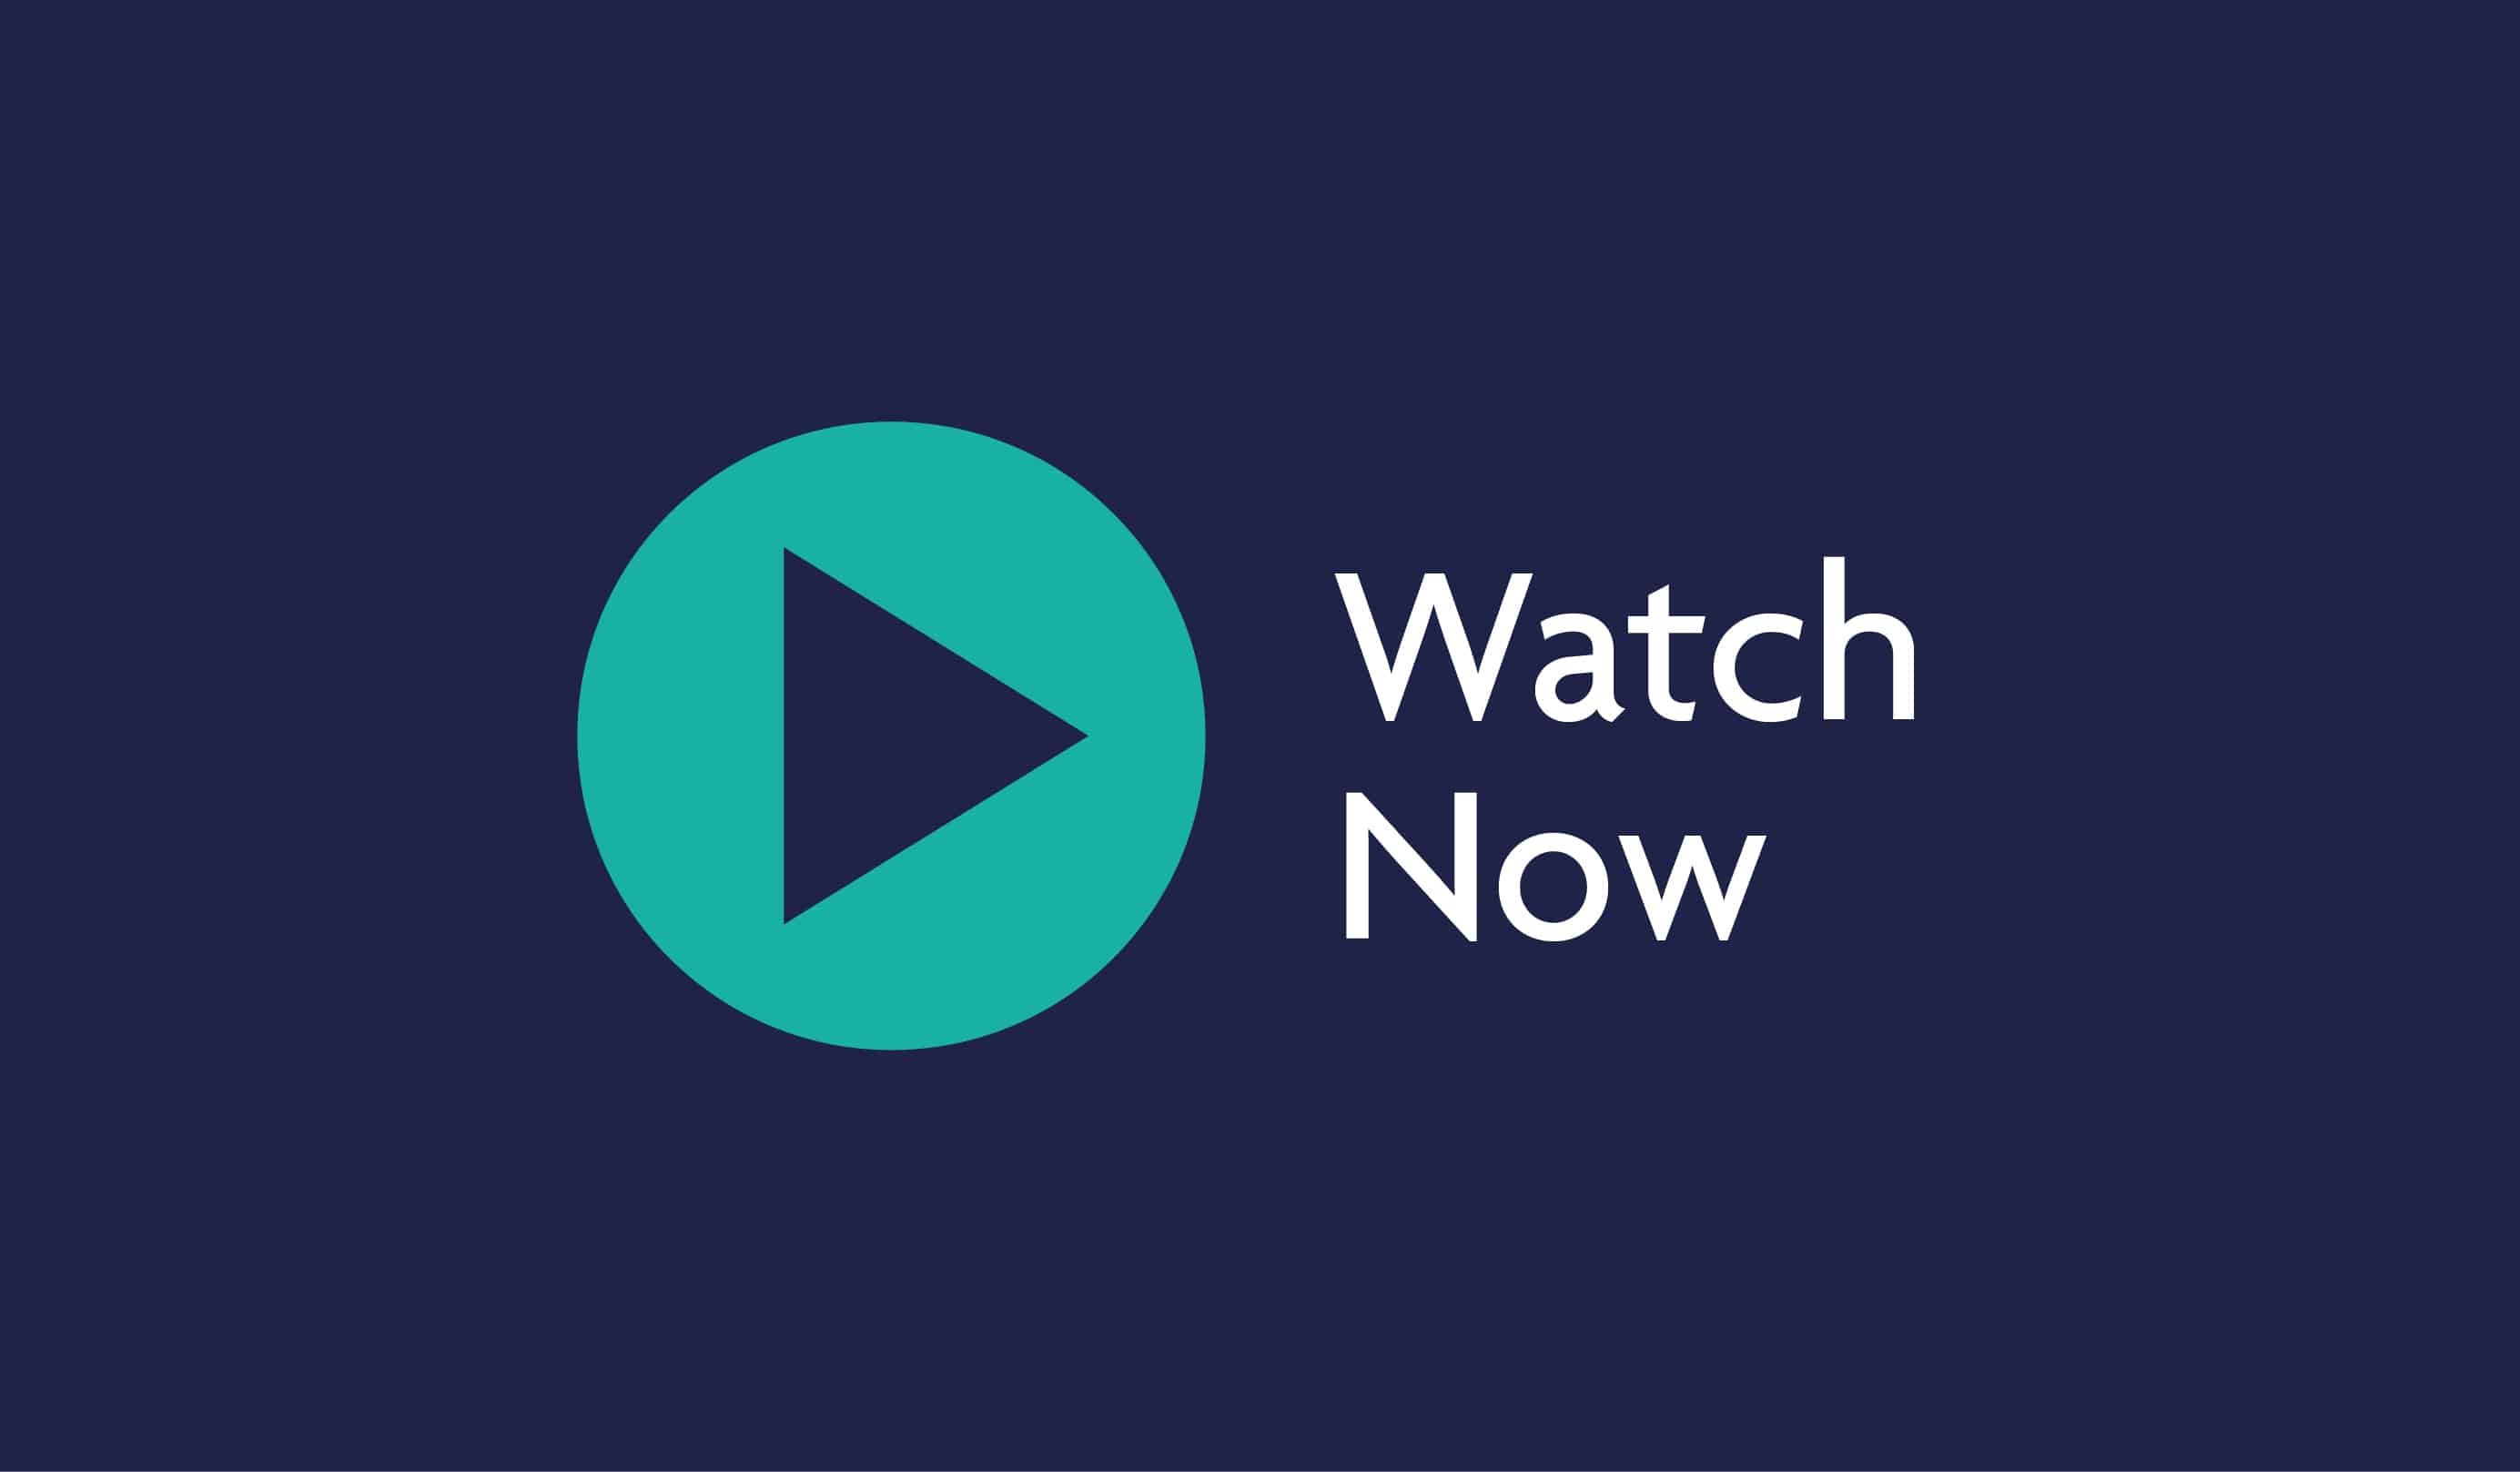 REPLAY: Clinical Negligence Case Law Update Webinar, 27 April 2022